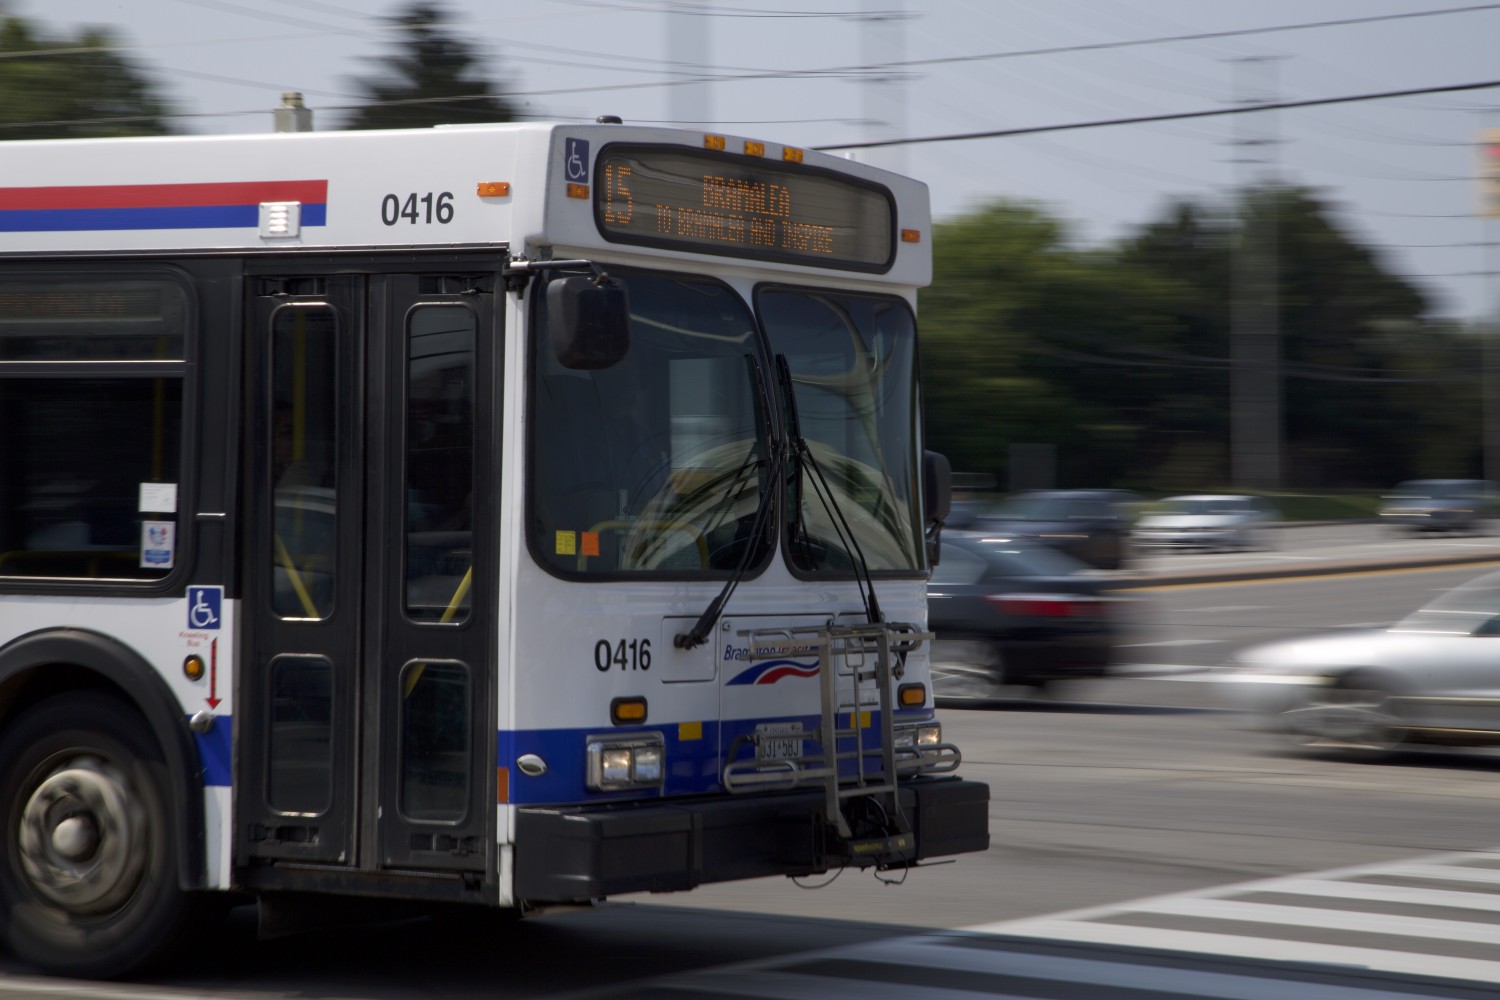 No sponsor emerges to give seniors free transit, and odds are even worse for young riders